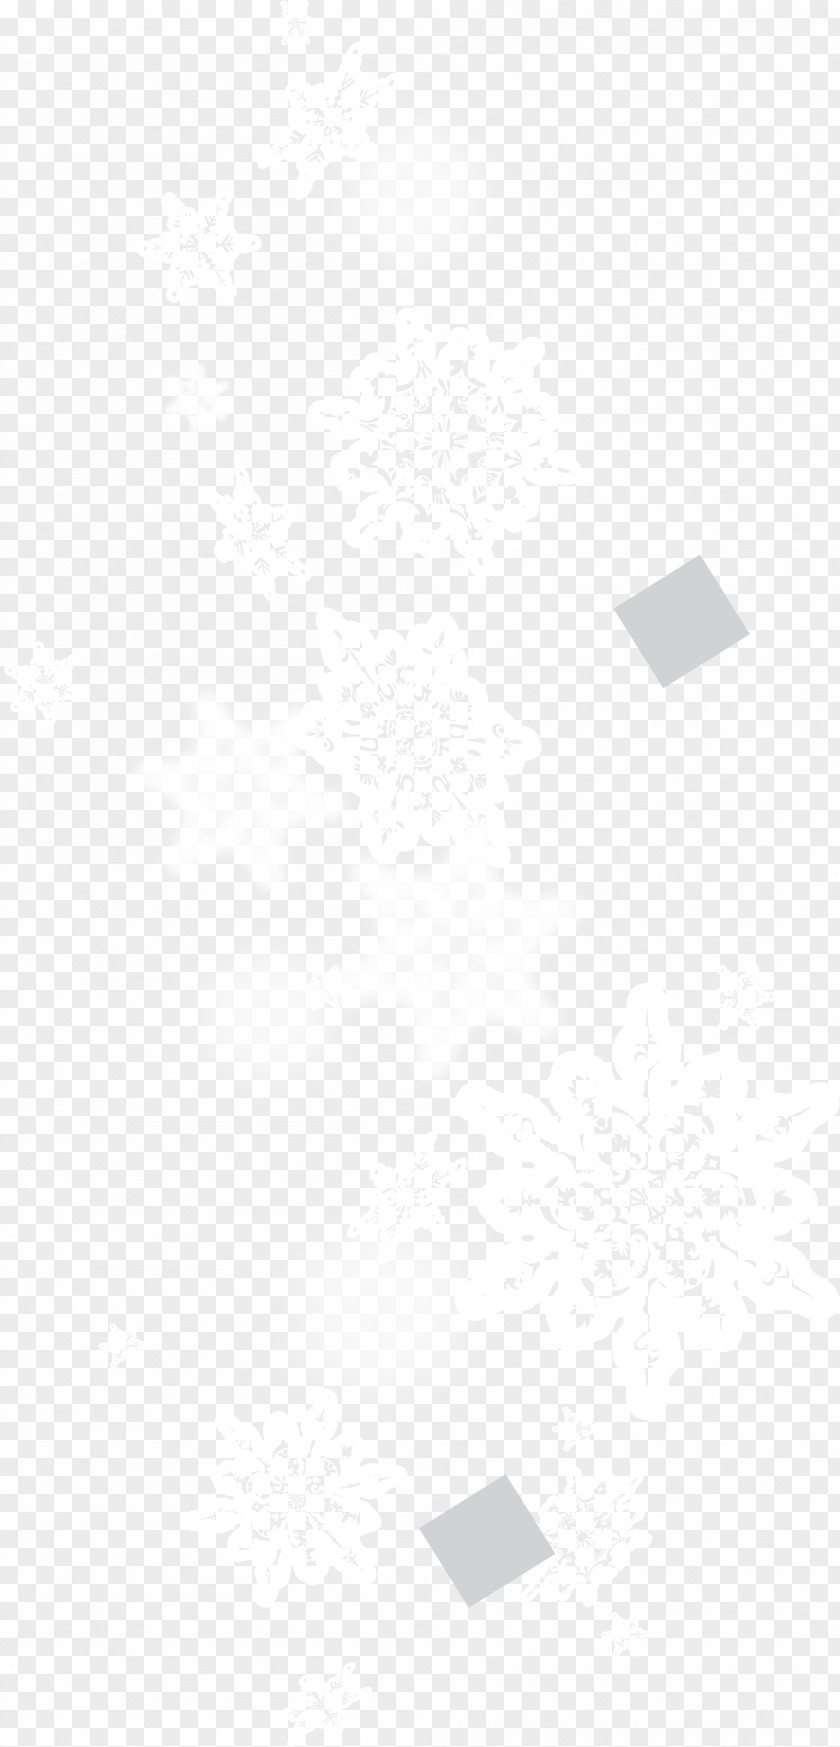 White Snowflake Floating Material Line Black And Angle Point Pattern PNG